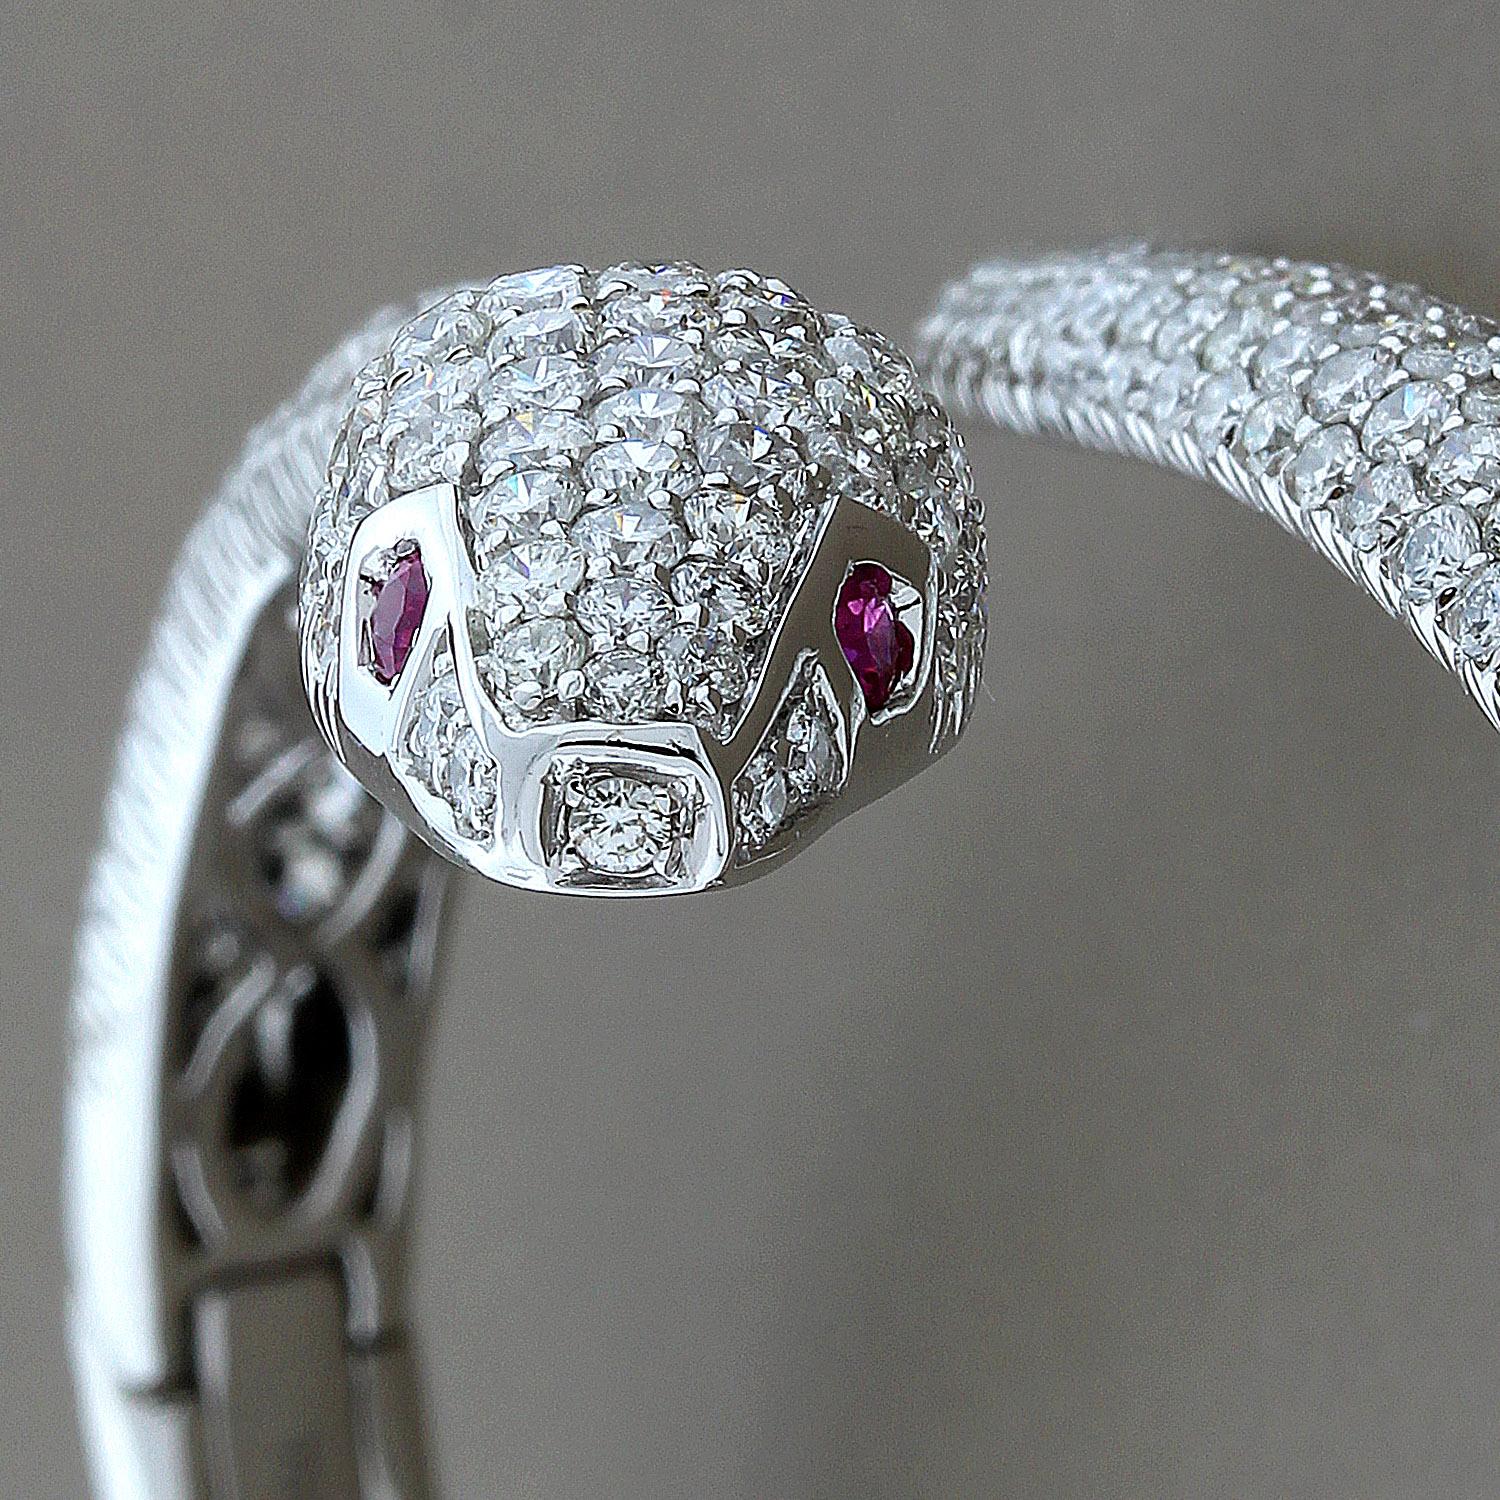 A sexy and sleek piece, this cuff bracelet features 6.74 carats of VS quality round cut diamonds set in 14K white gold. The surreal snake has two ruby eyes for a captivating look.
Both the head and tail move open to allow an easy wear. 
Fits most